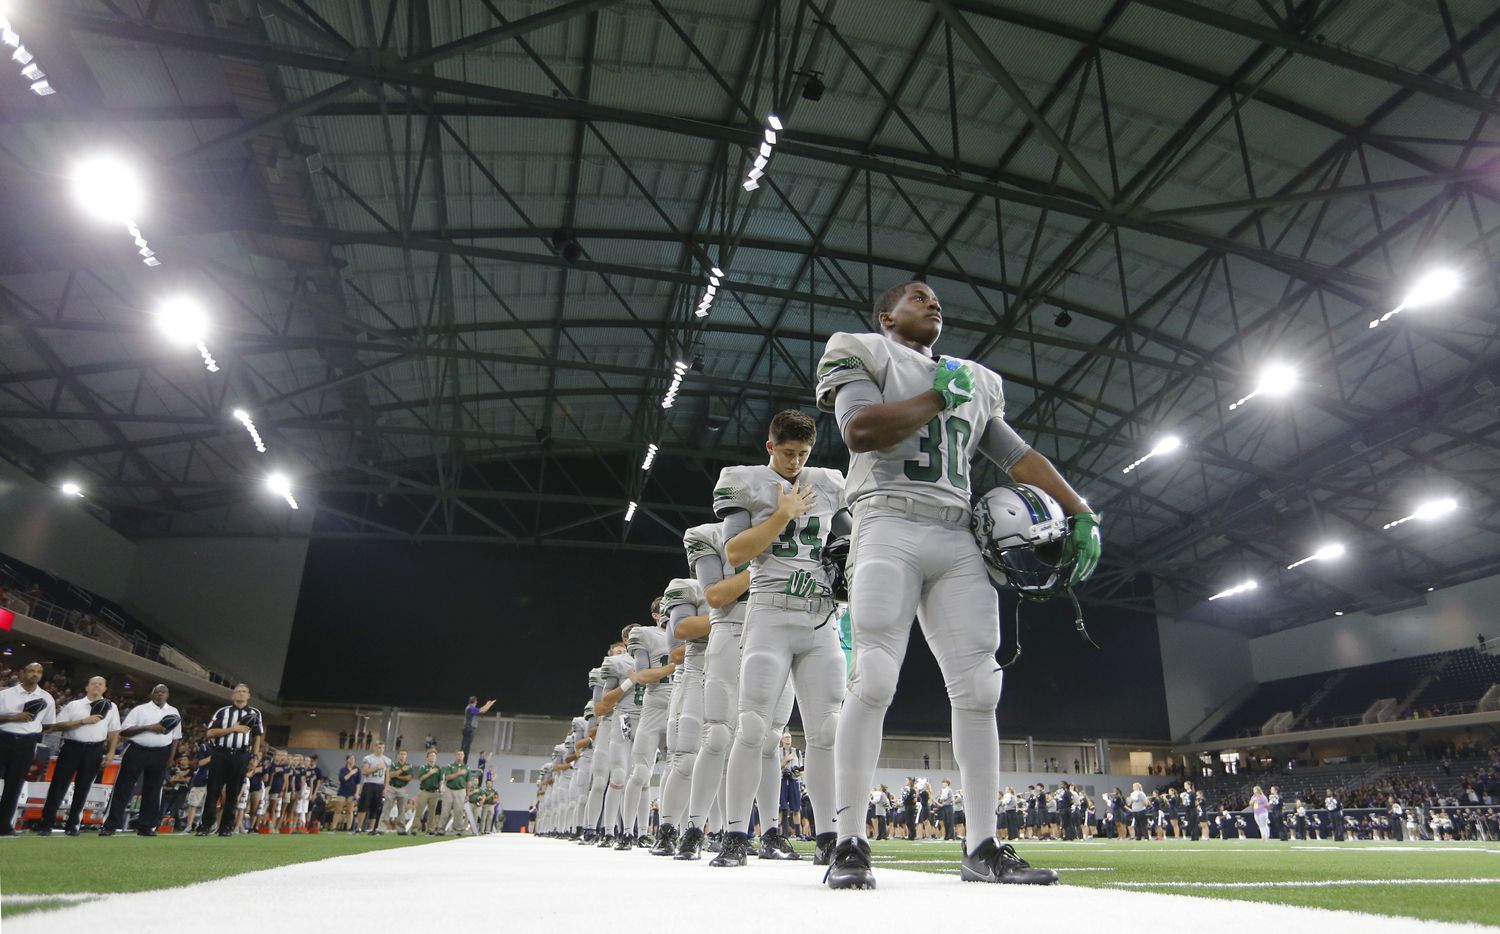 Reedy's Justin Gipson (30) and team during the National Anthem before playing against Independence High School in the first high school football game at The Star in Frisco on Saturday, Aug. 27, 2016.